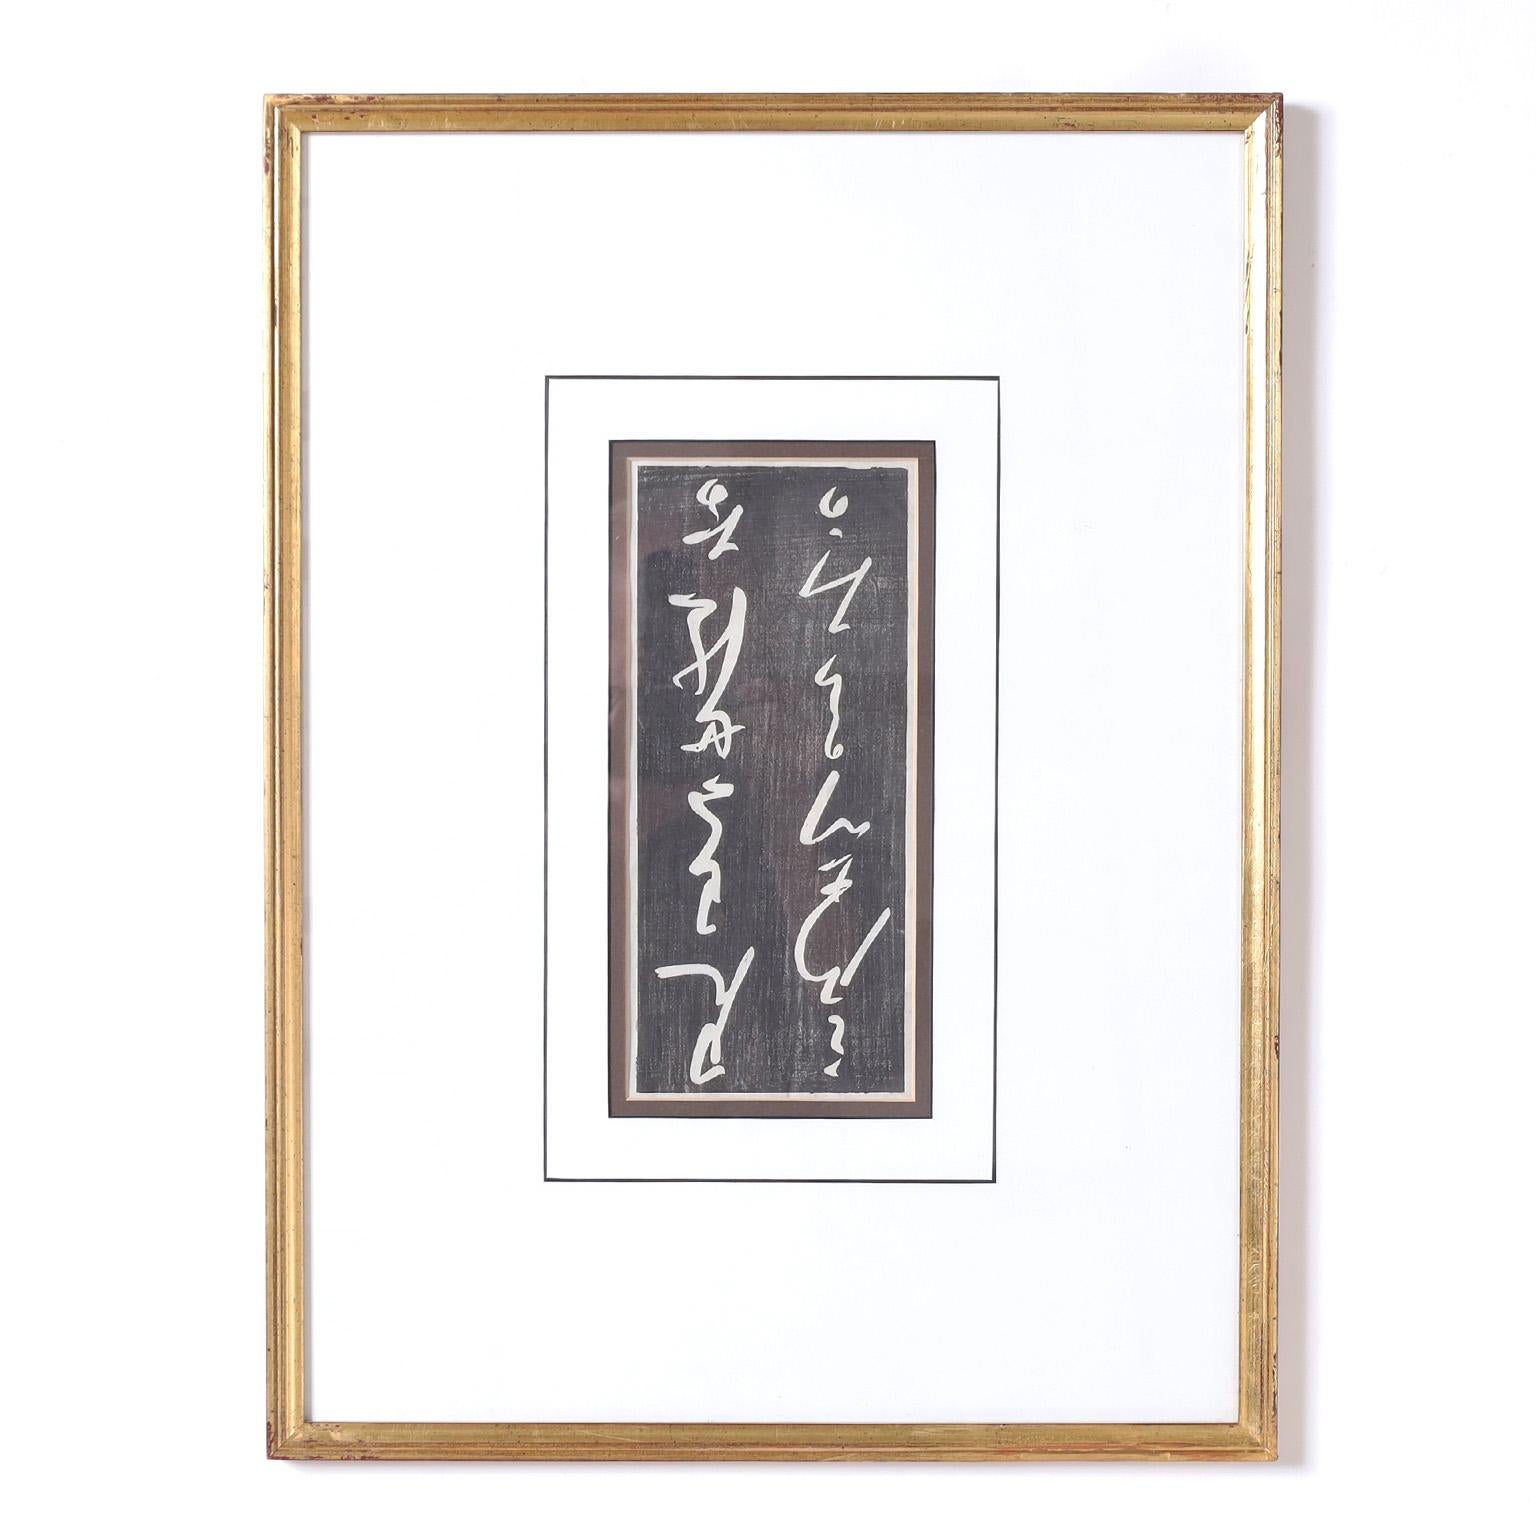 Rare and remarkable set of ten 19th century Japanese calligraphy prints on paper executed in a woodblock technique and presented under glass in a gilt wood frame.